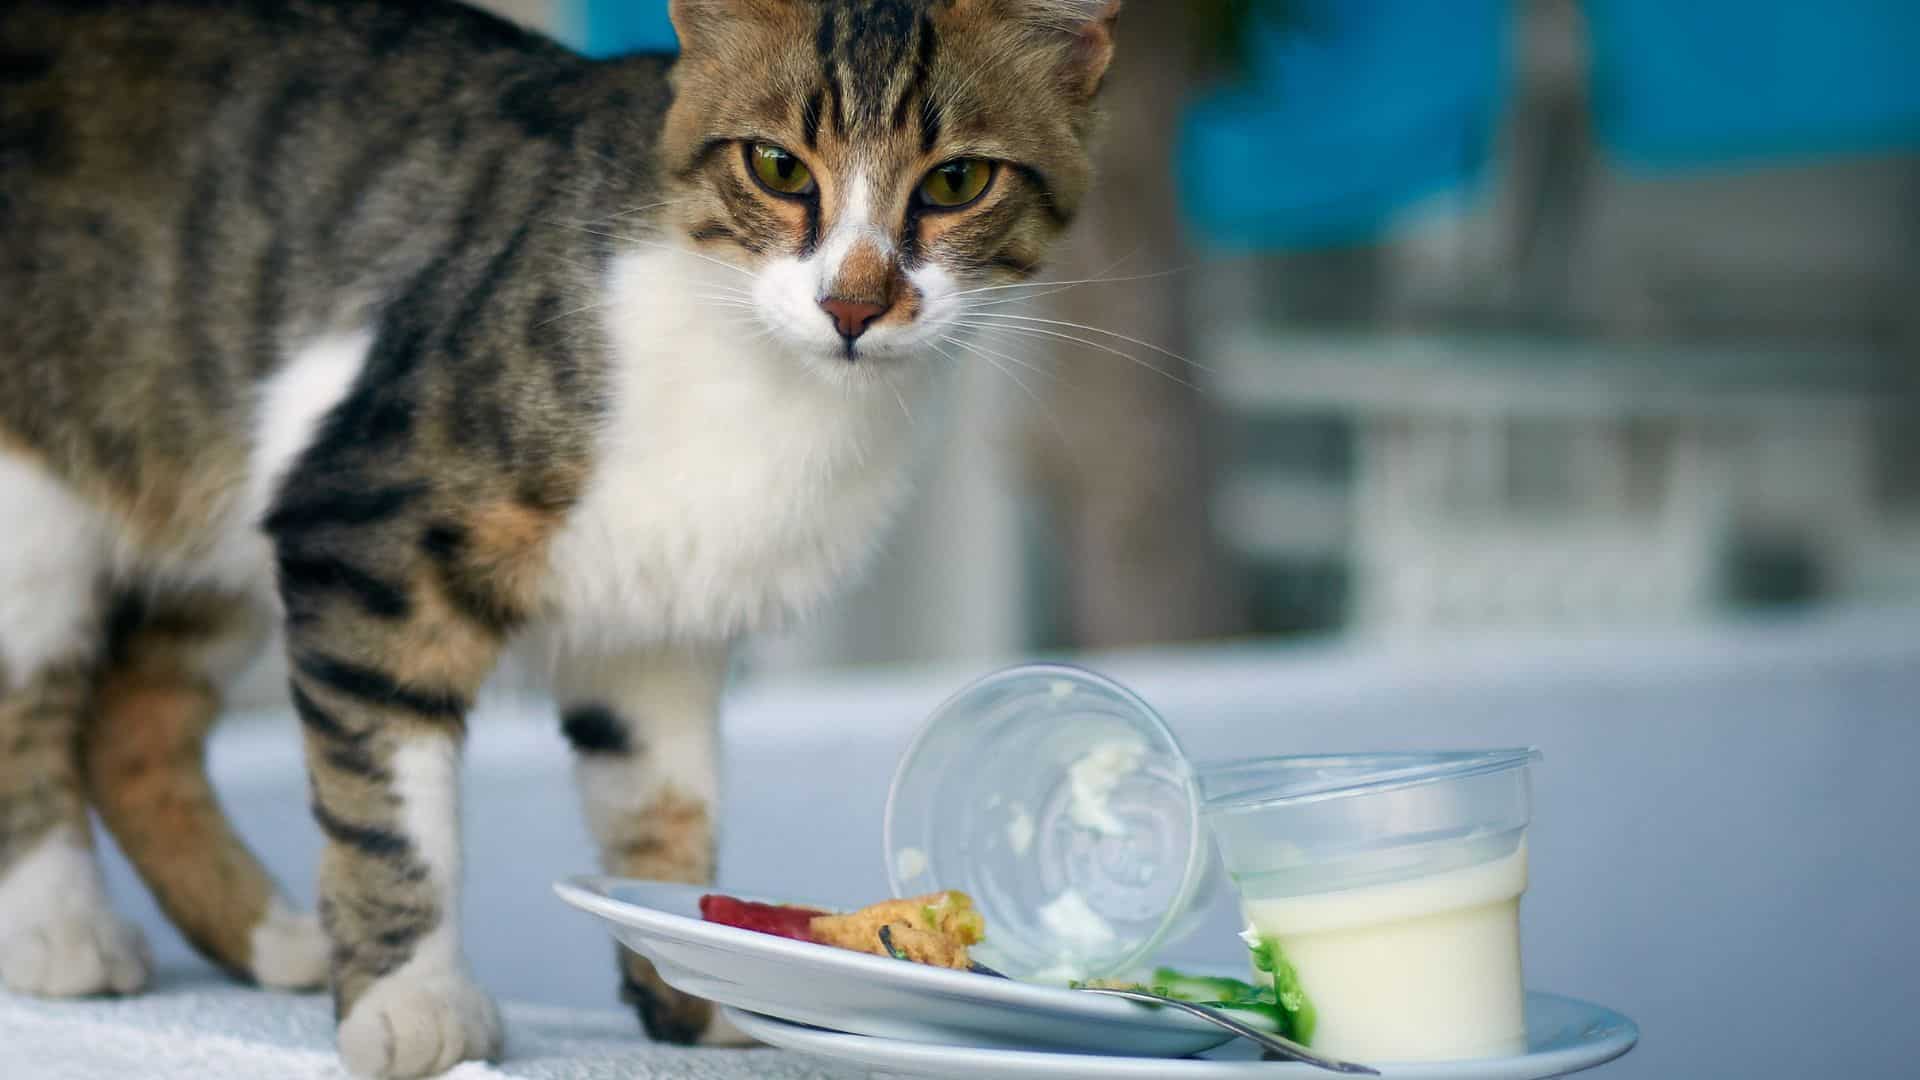 Avoid feeding cat food with artificial sweetener and no nutritional value